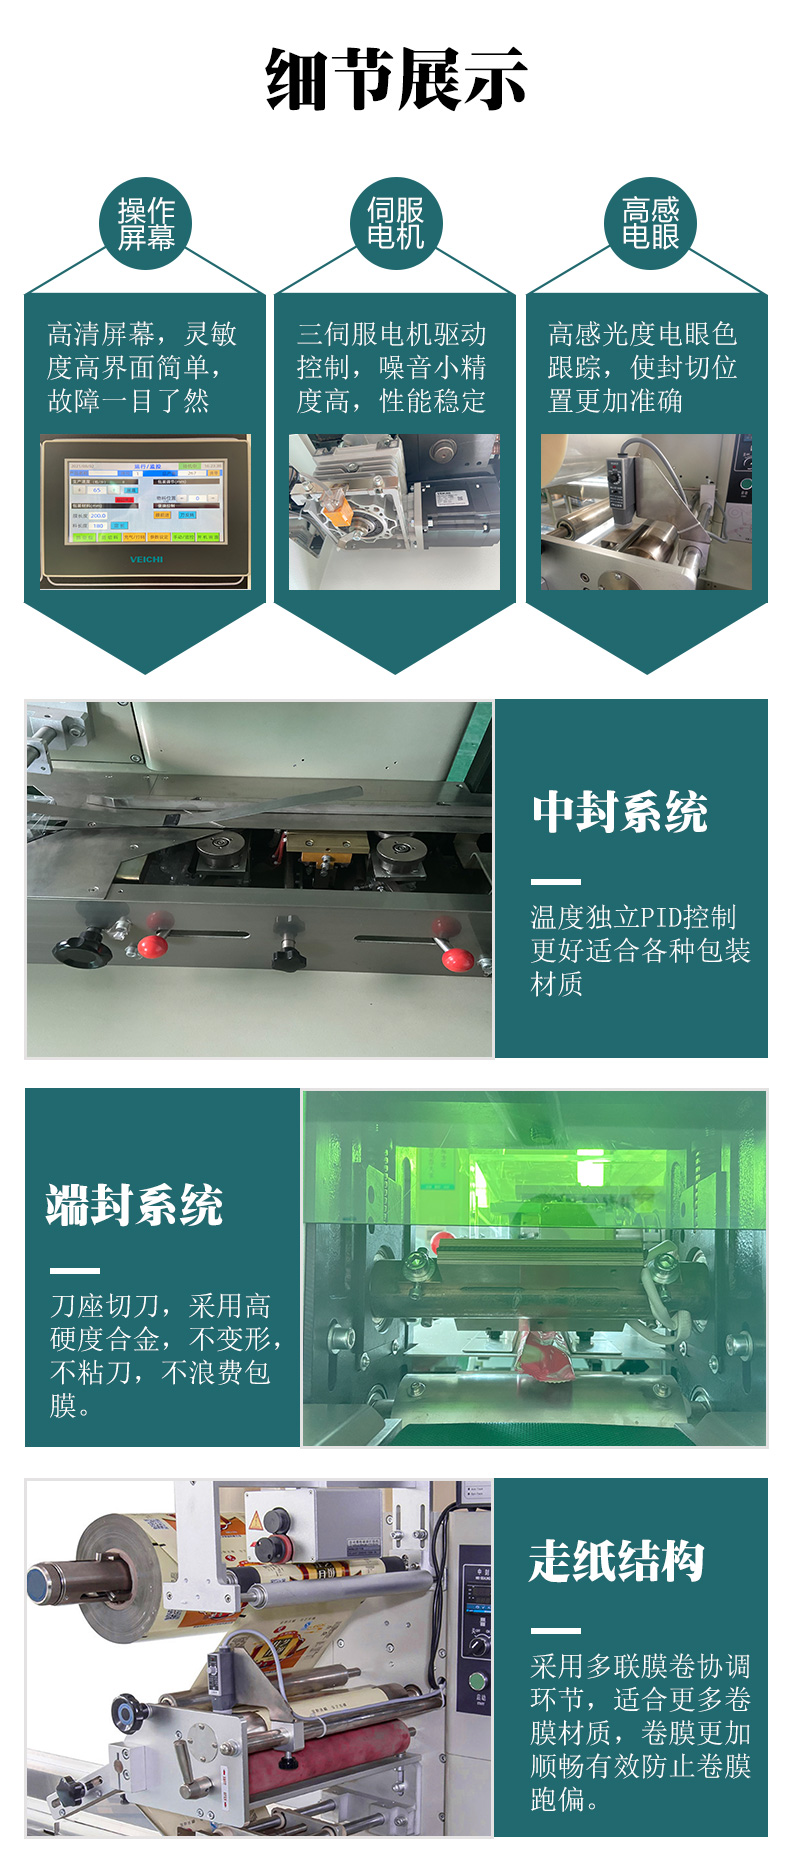 DK360 tray persimmon cake packaging machine supplied by Dikai manufacturer for high-speed and stable pillow type food packaging